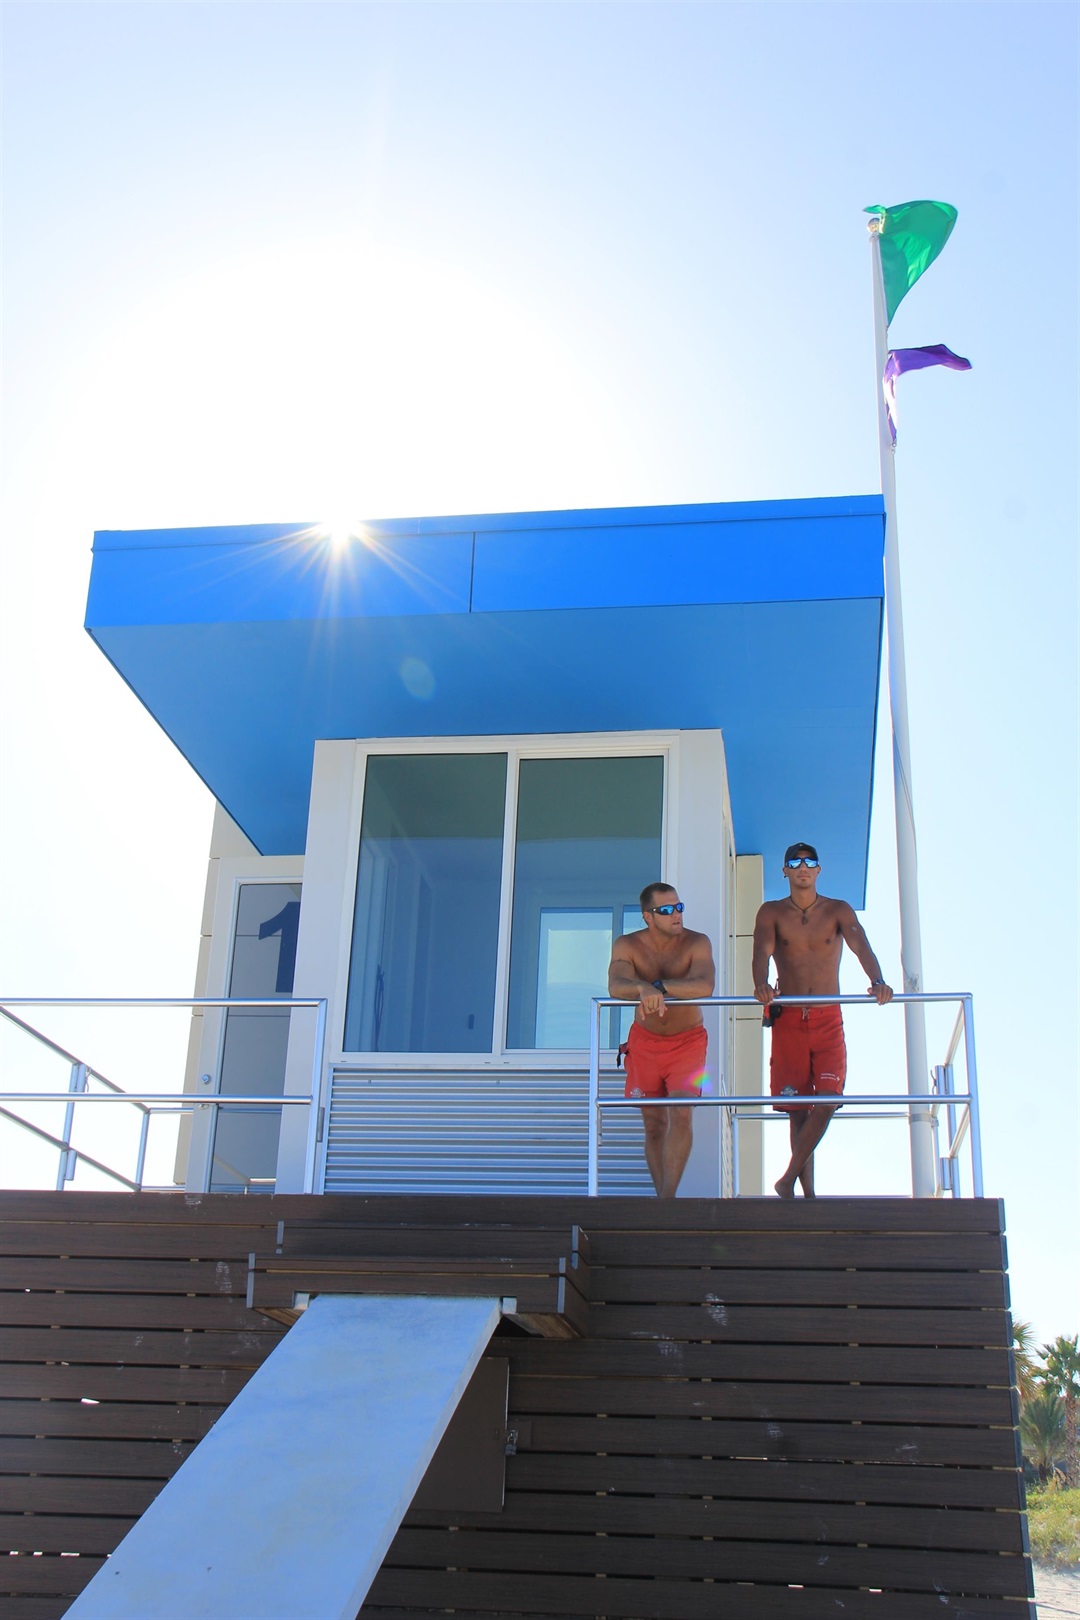 New lifeguard pavilion named for Carbona